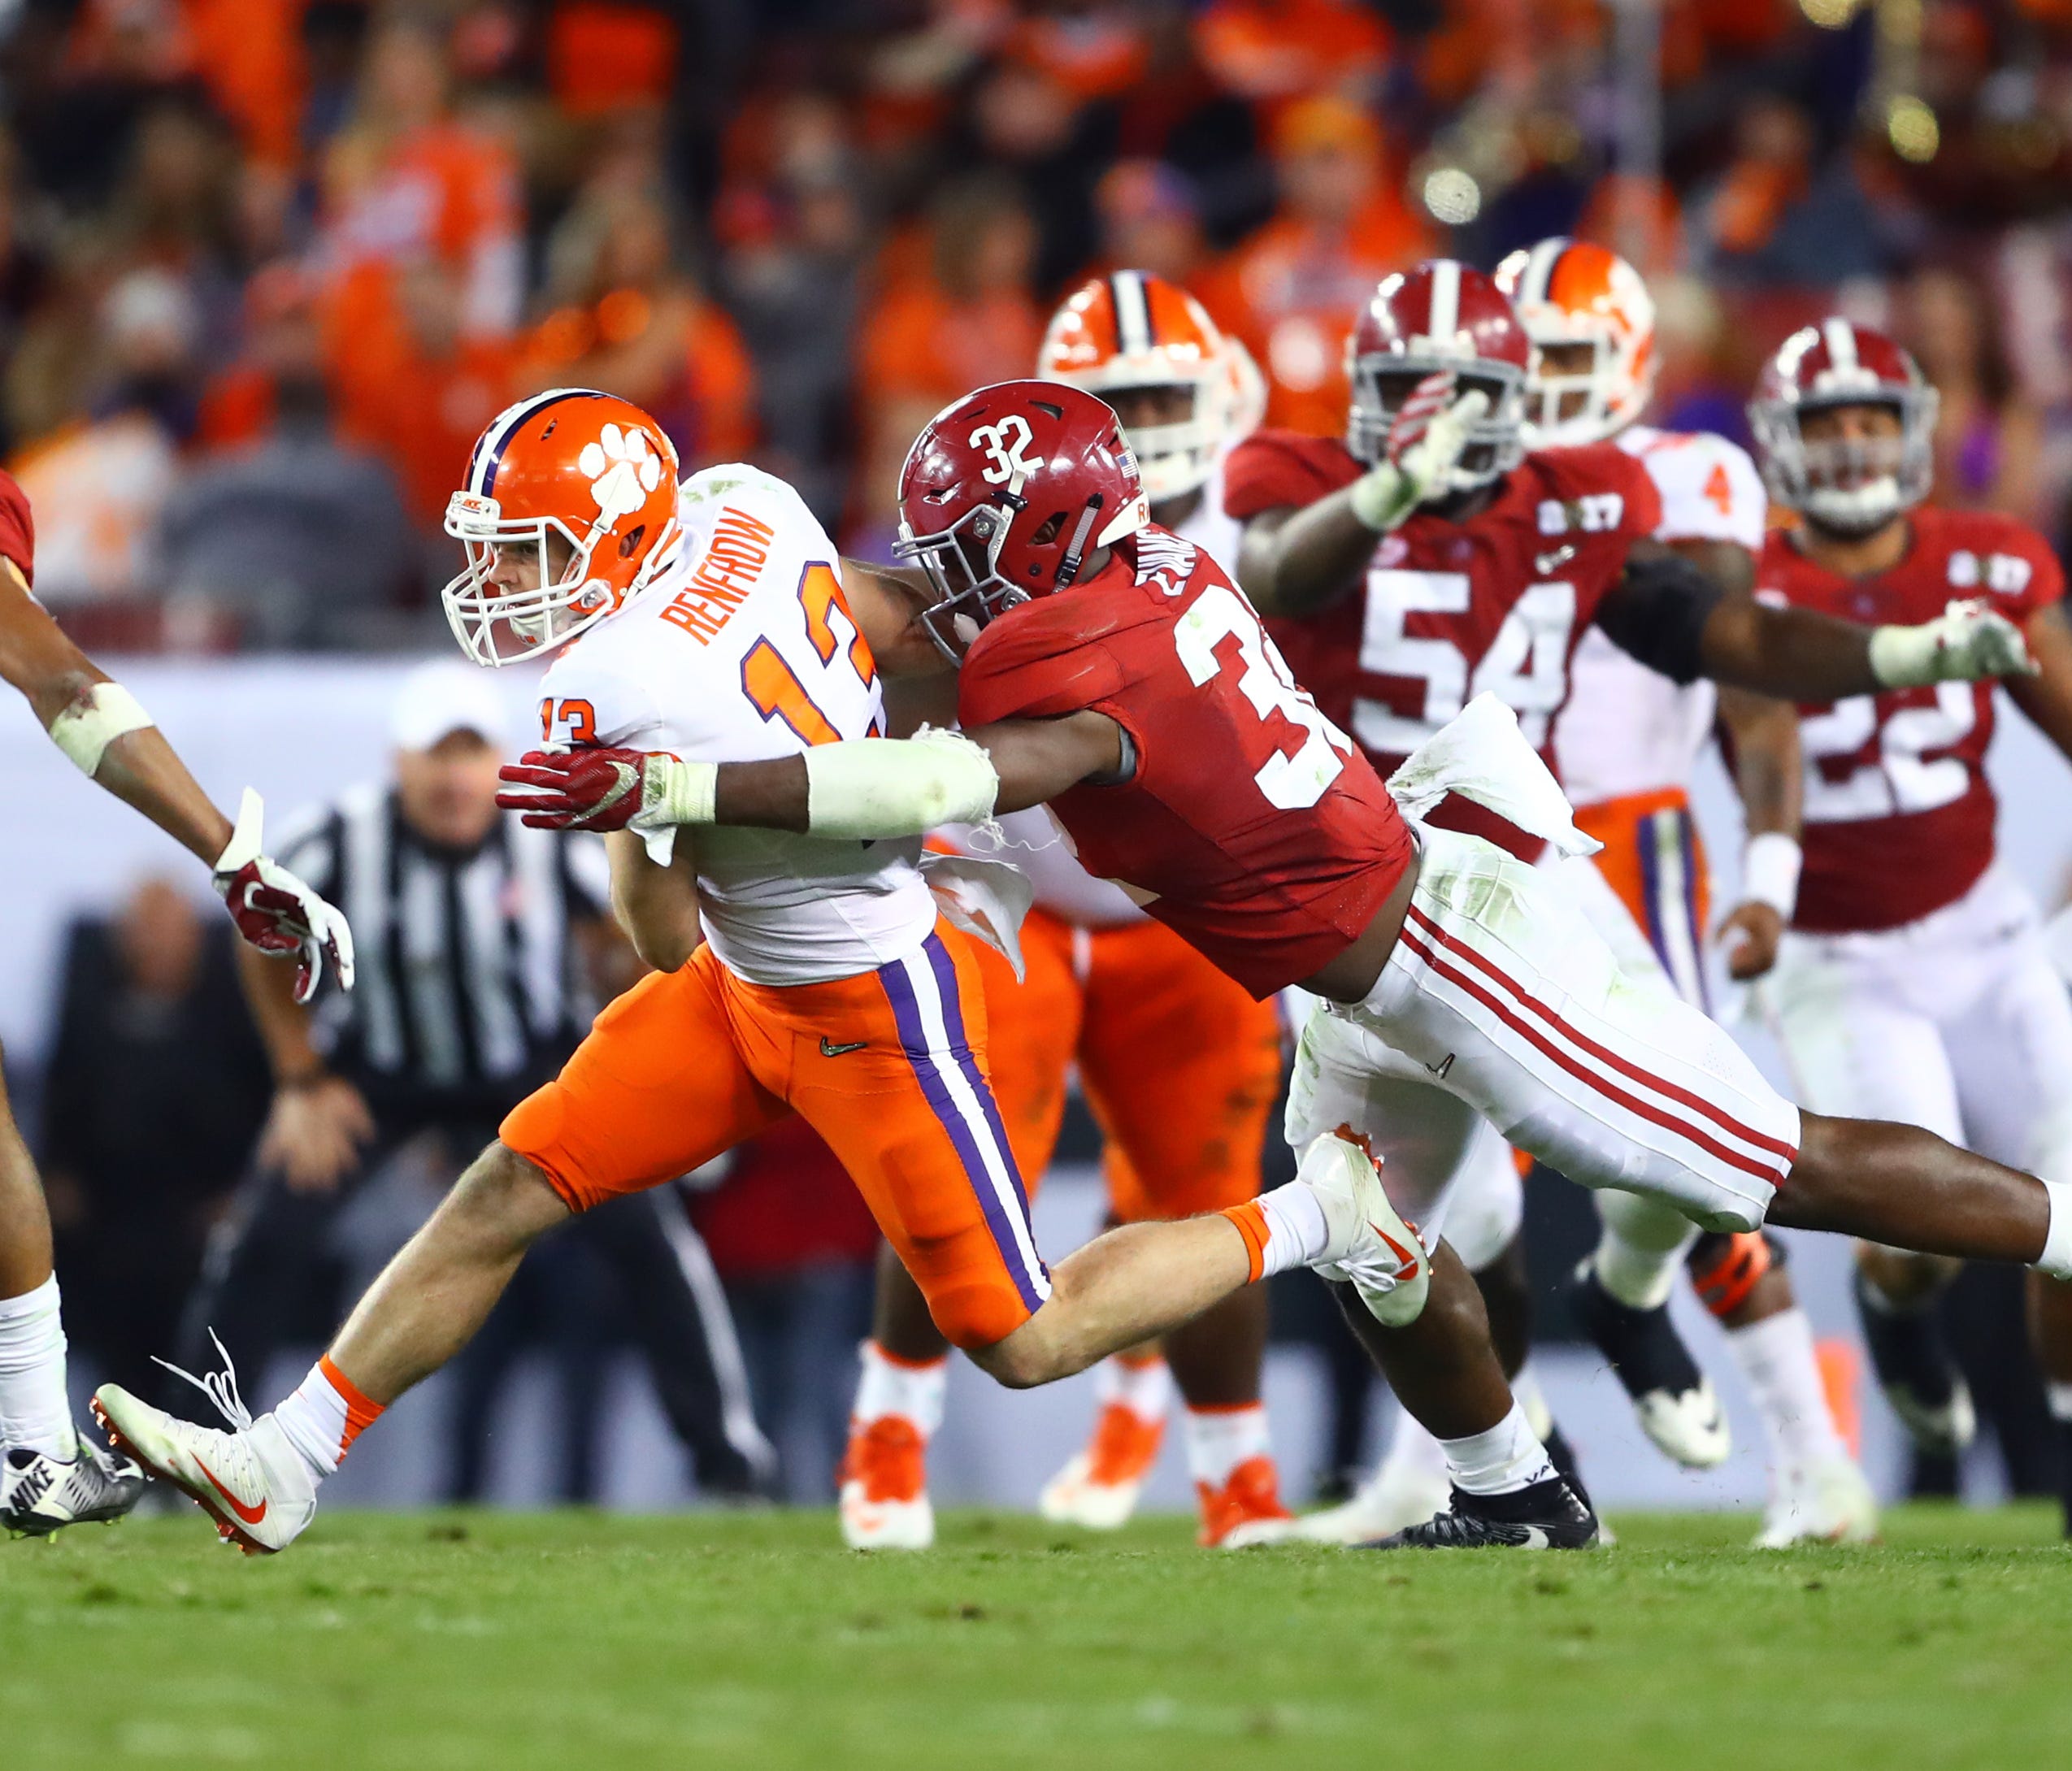 Clemson wide receiver Hunter Renfrow is tackled by Alabama linebacker Rashaan Evans during the College Football Playoff championship game.